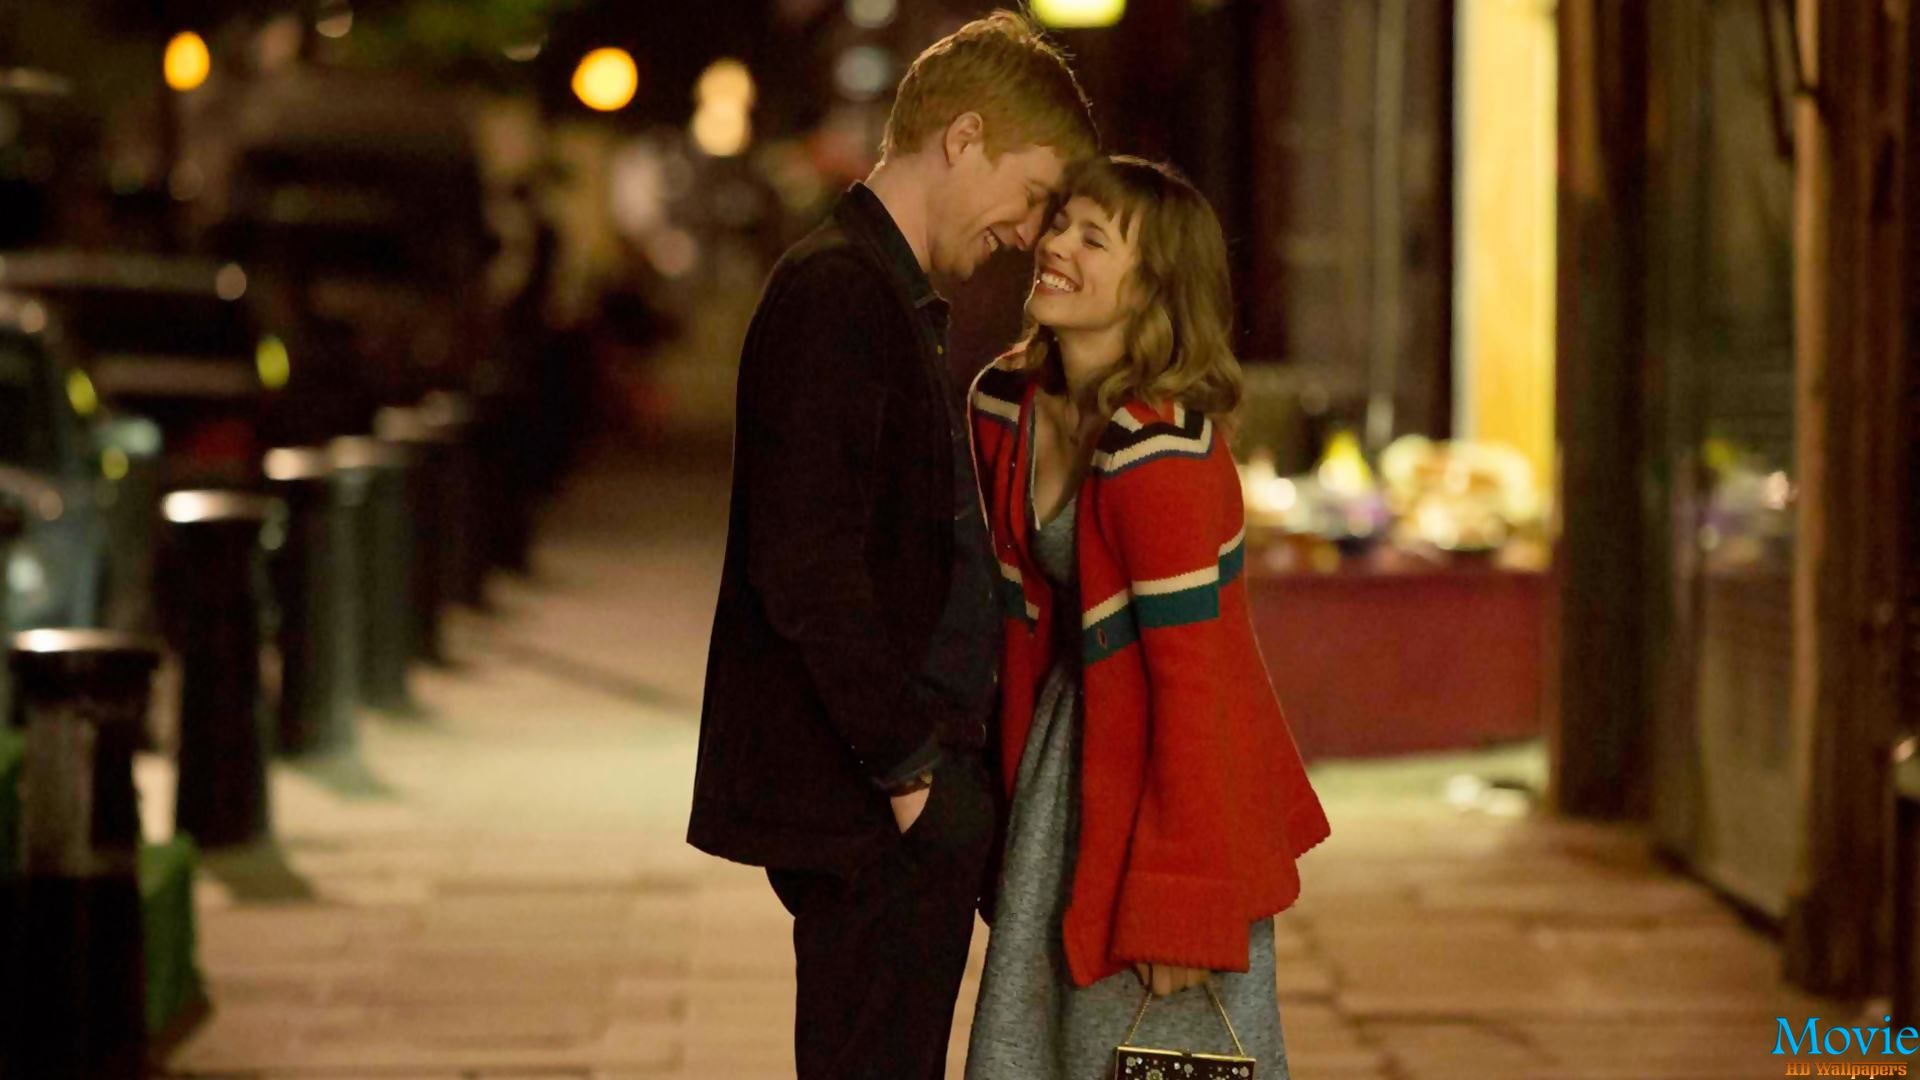 About Time | Romantic movies, Best romantic movies, About time movie